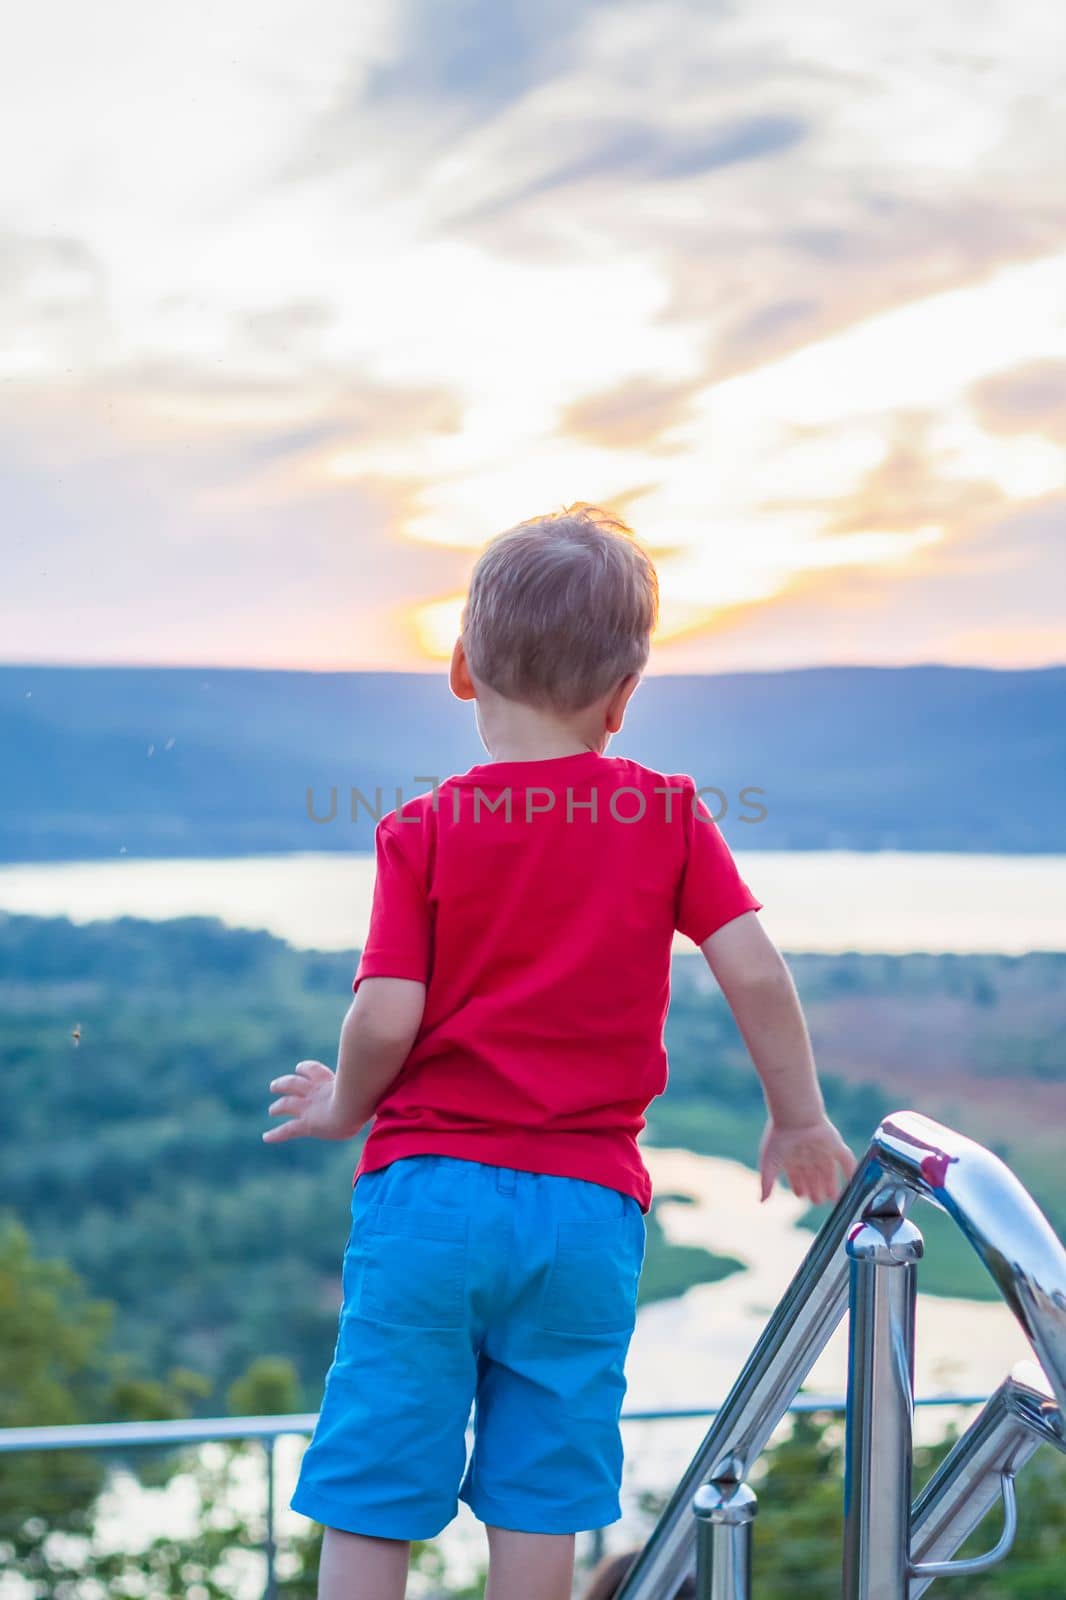 Cute Boy in a red T-shirt on the background of a stunning sunset. Journey.  The face expresses natural joyful emotions. Not staged photos from nature.